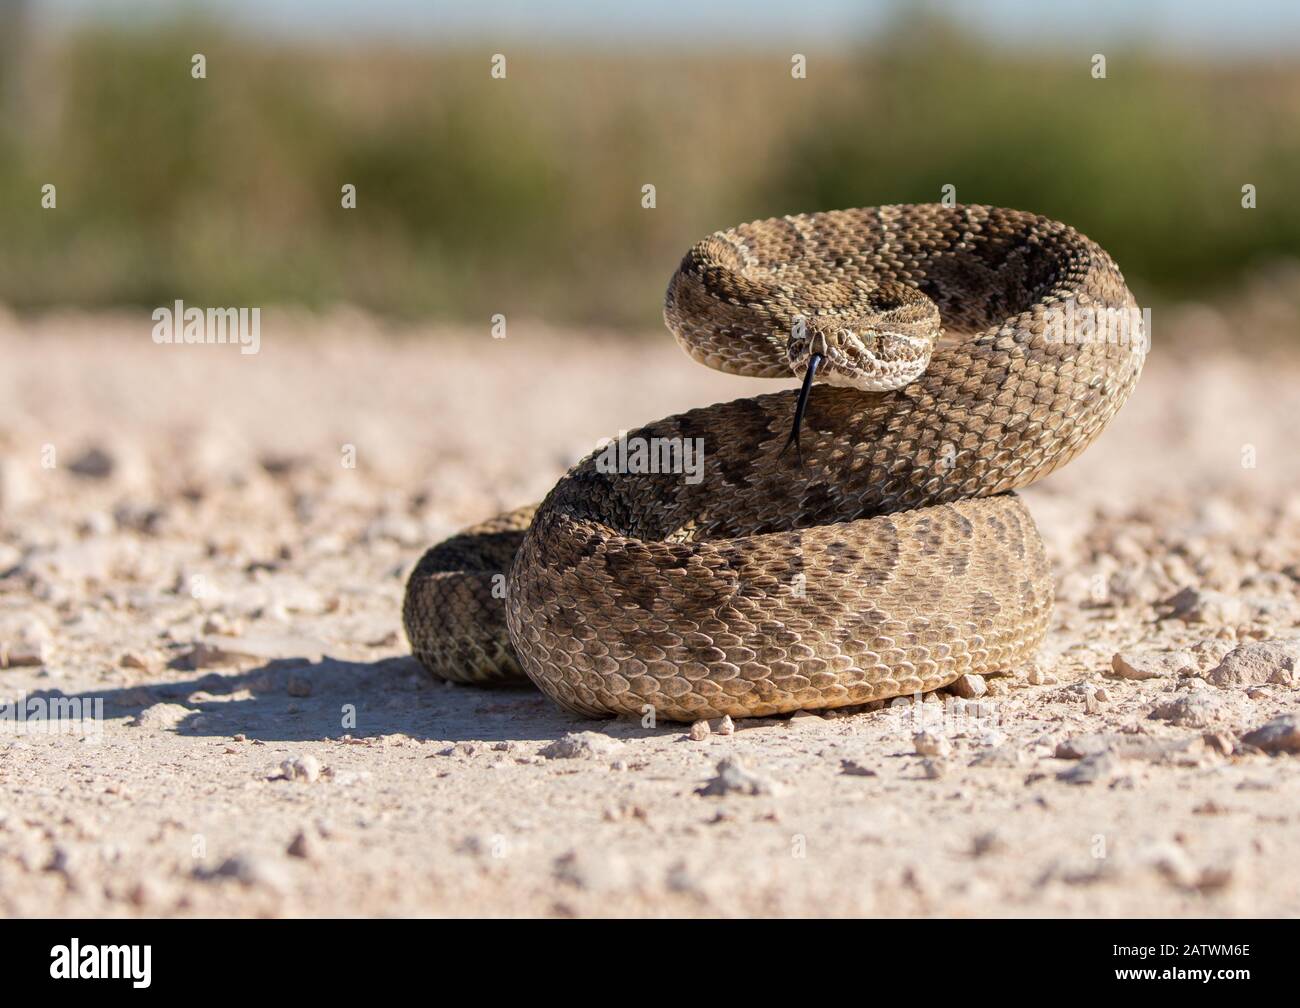 Texas Rattlesnake Curled Up ready to attack if needed, Stock Photo